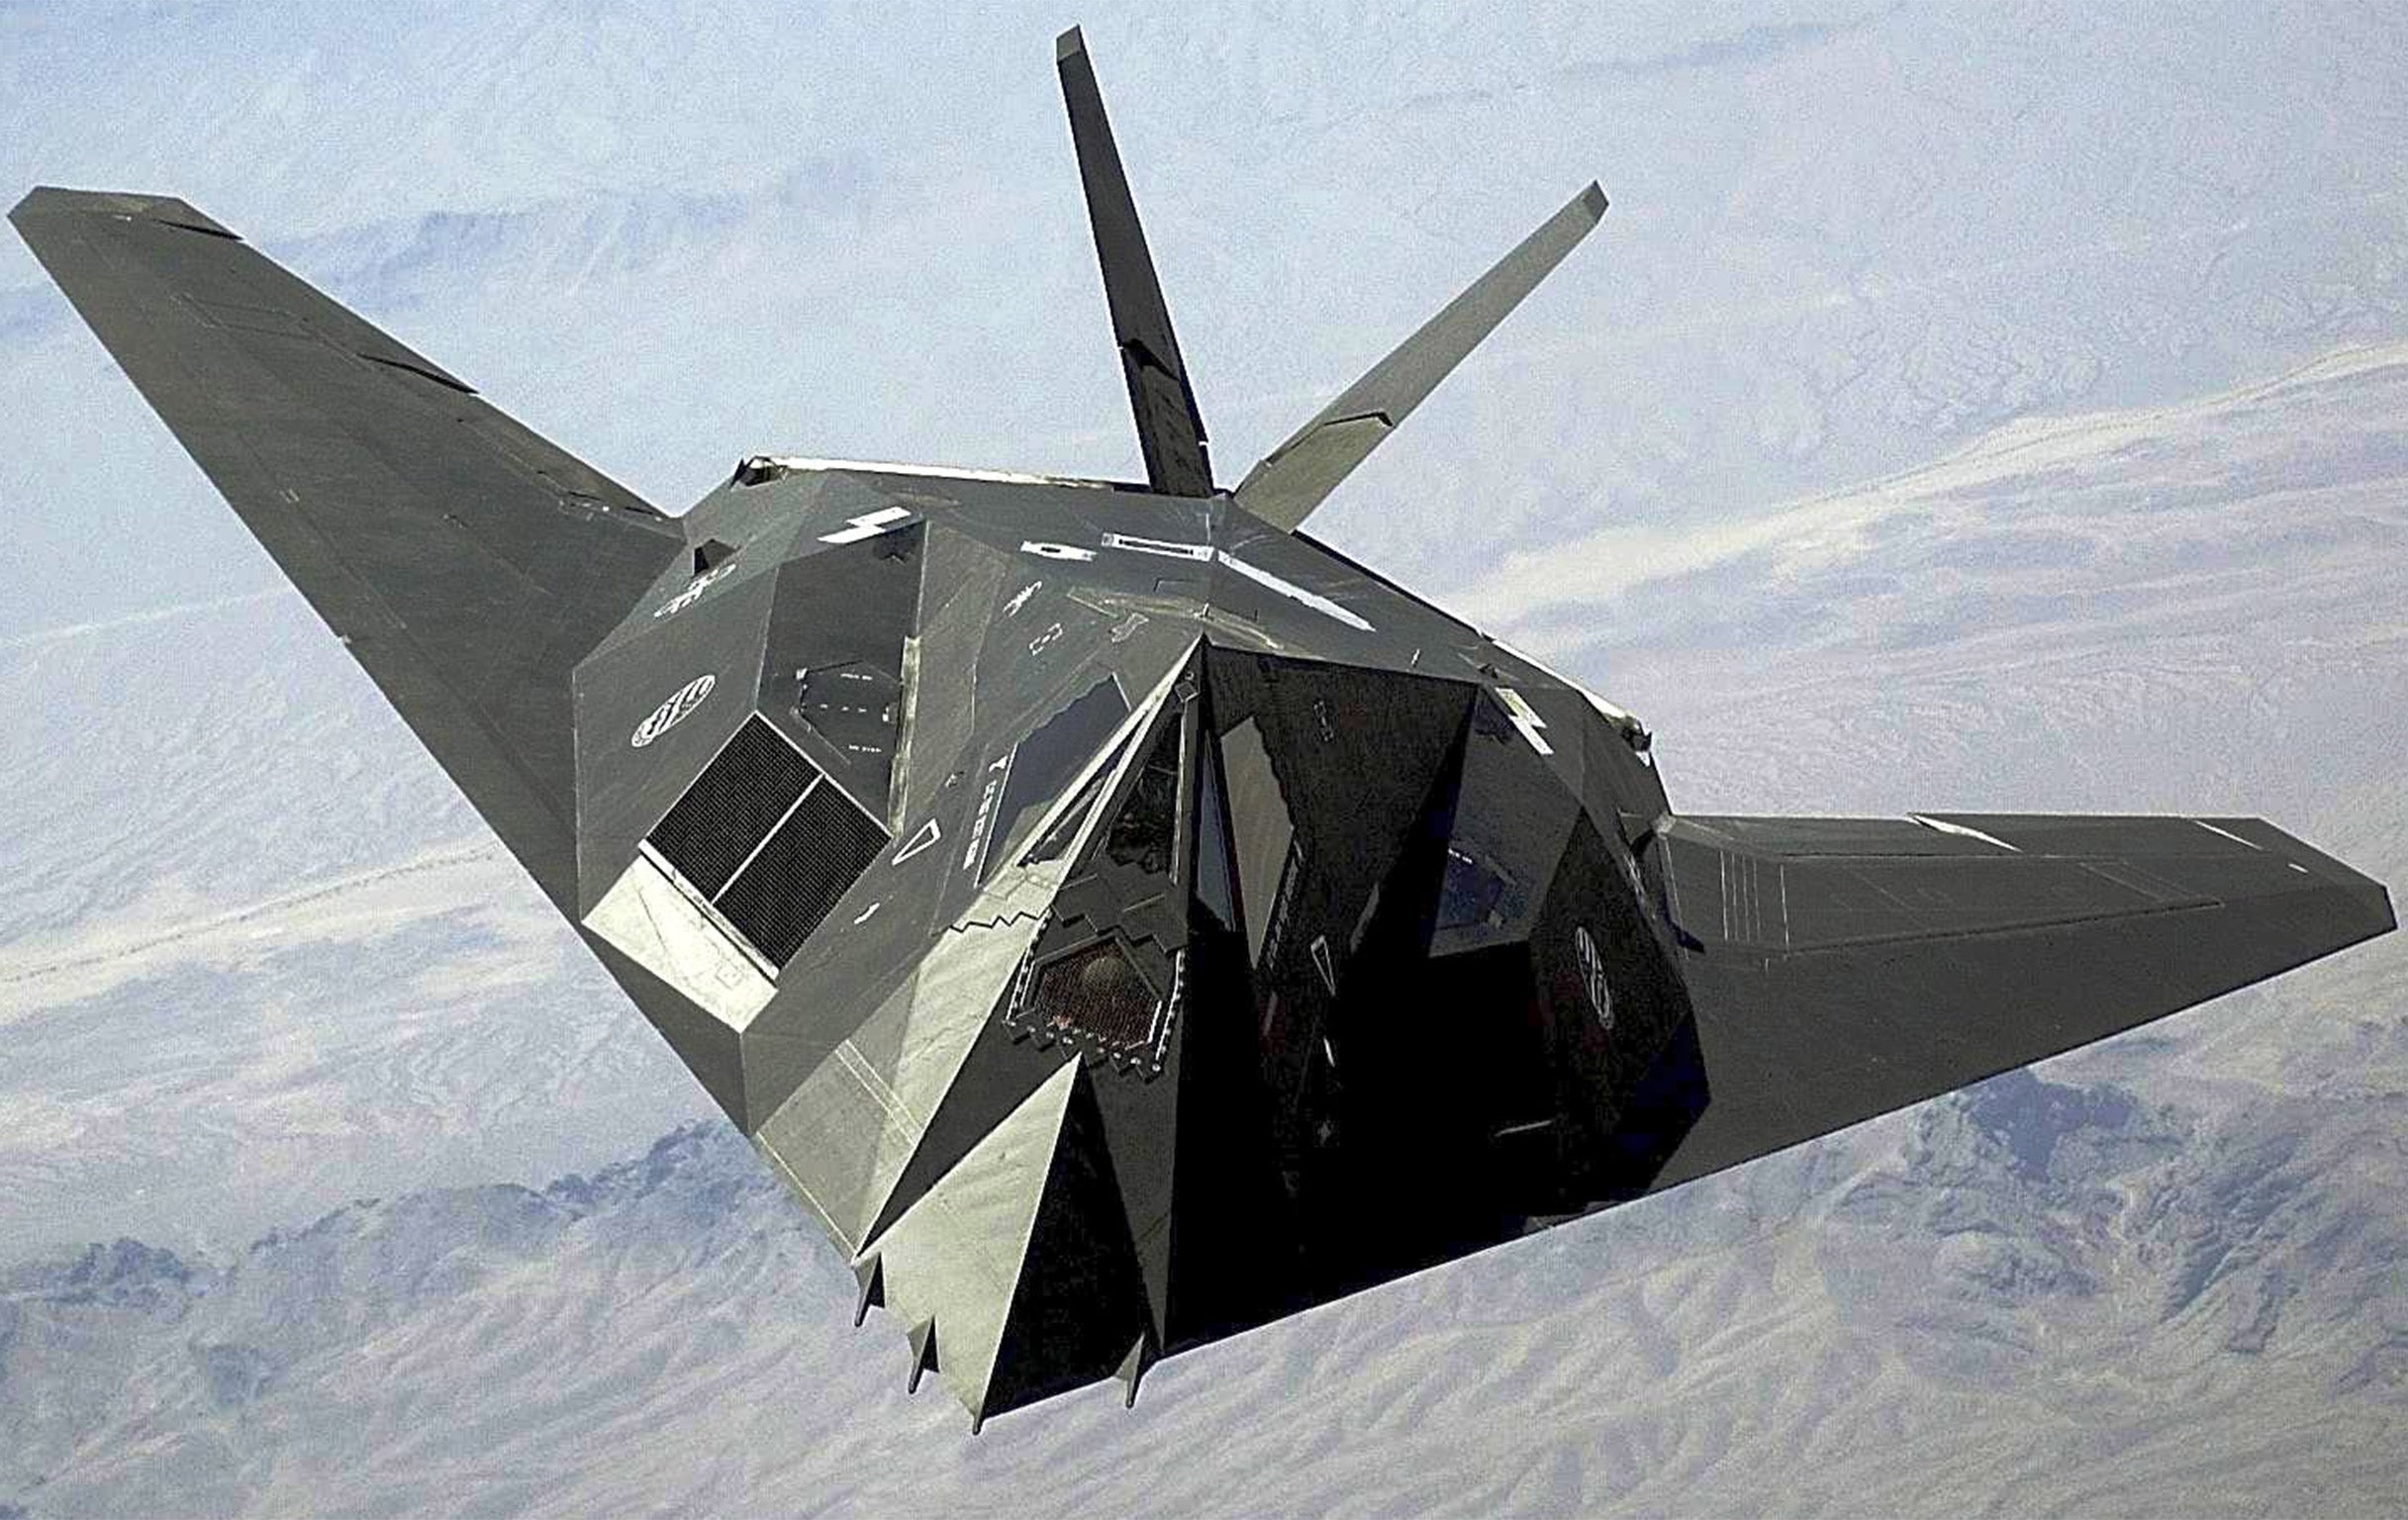 Fly bye: the F-117 Nighthawk stealth fighter could become an outdated weapon